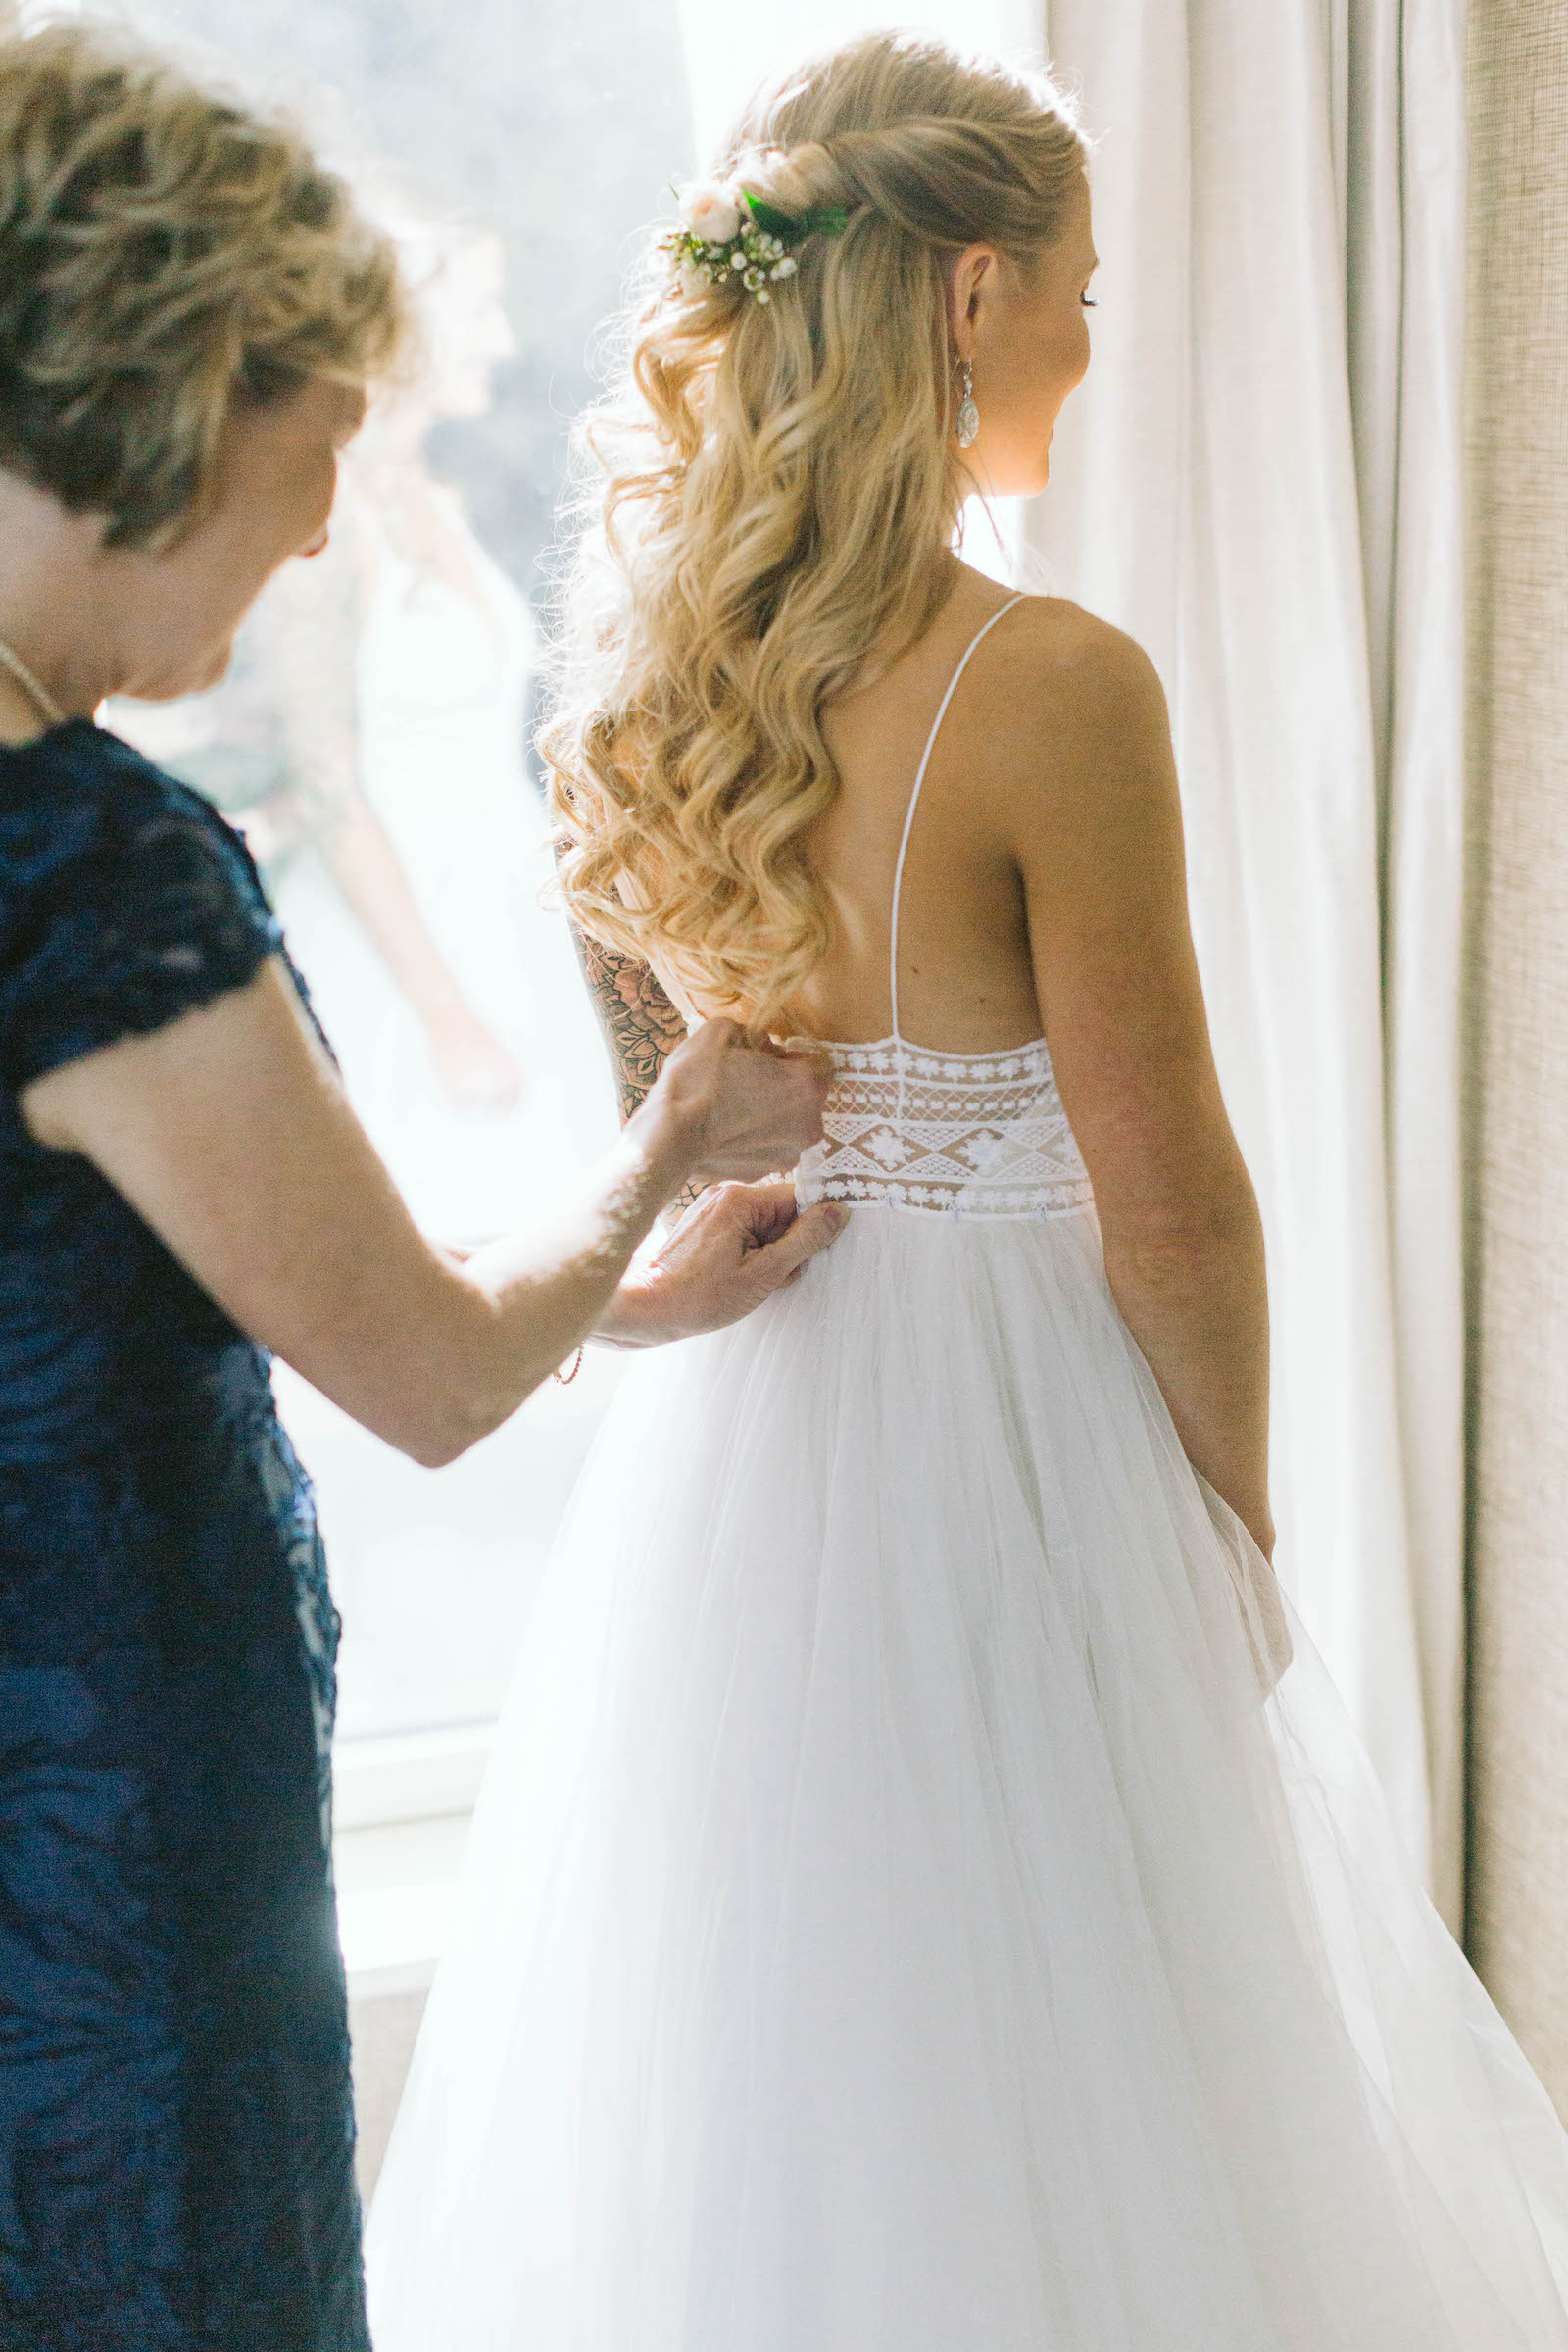 Classic Bride Getting Ready Wedding Portrait with Mom Wearing Boho Chic Wedding Dress with Delicate Lace Back Detail